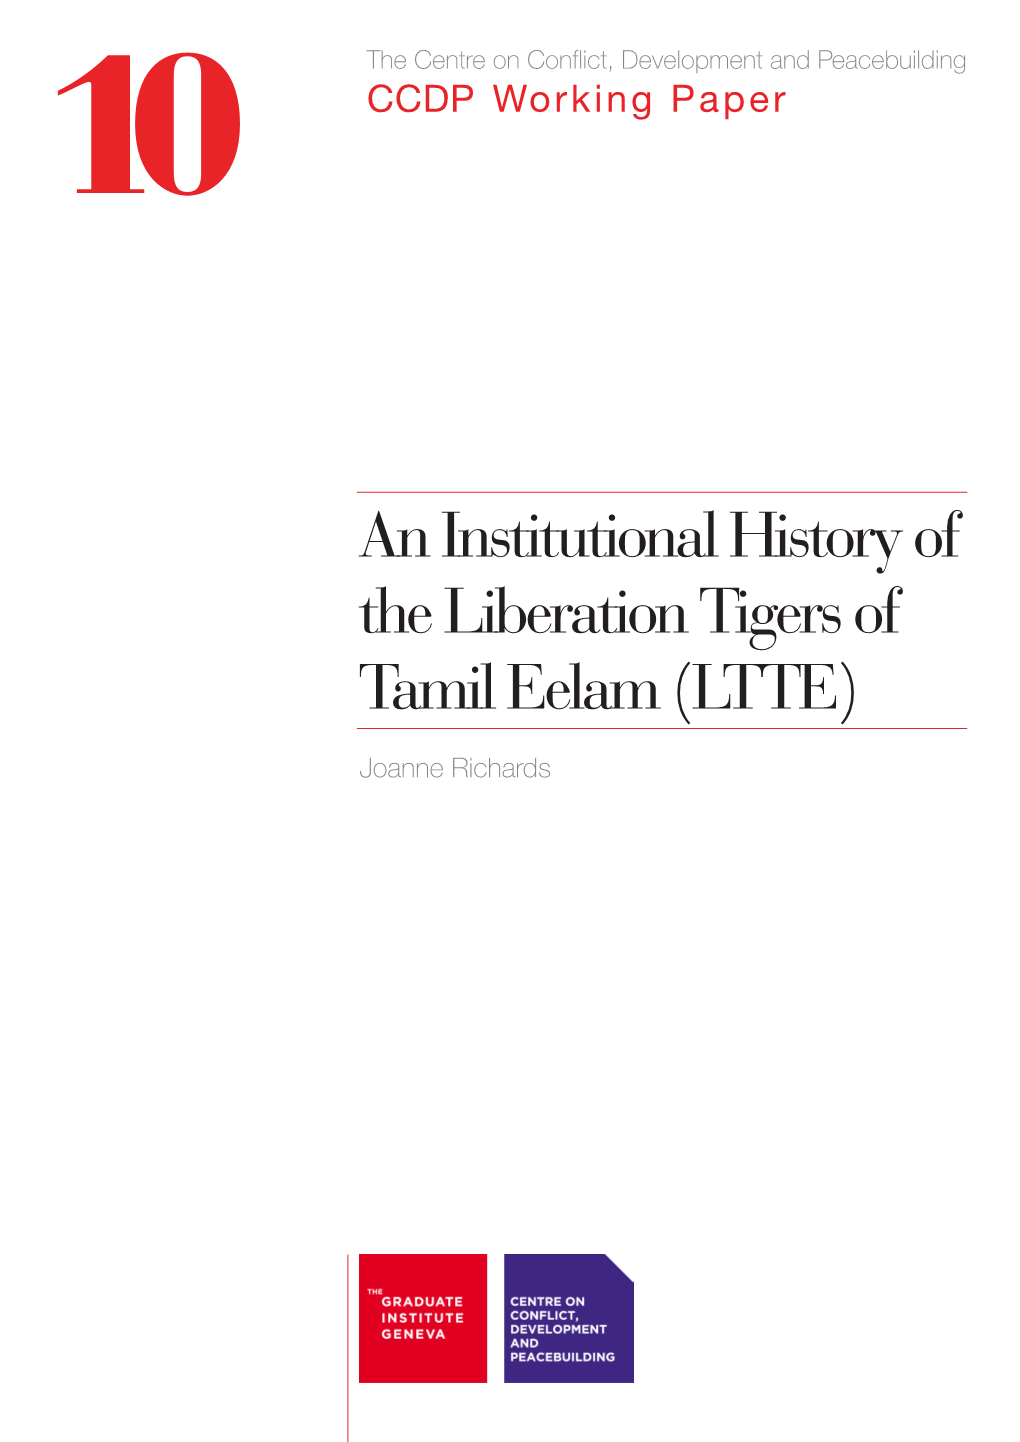 An Institutional History of the Liberation Tigers of Tamil Eelam (LTTE)